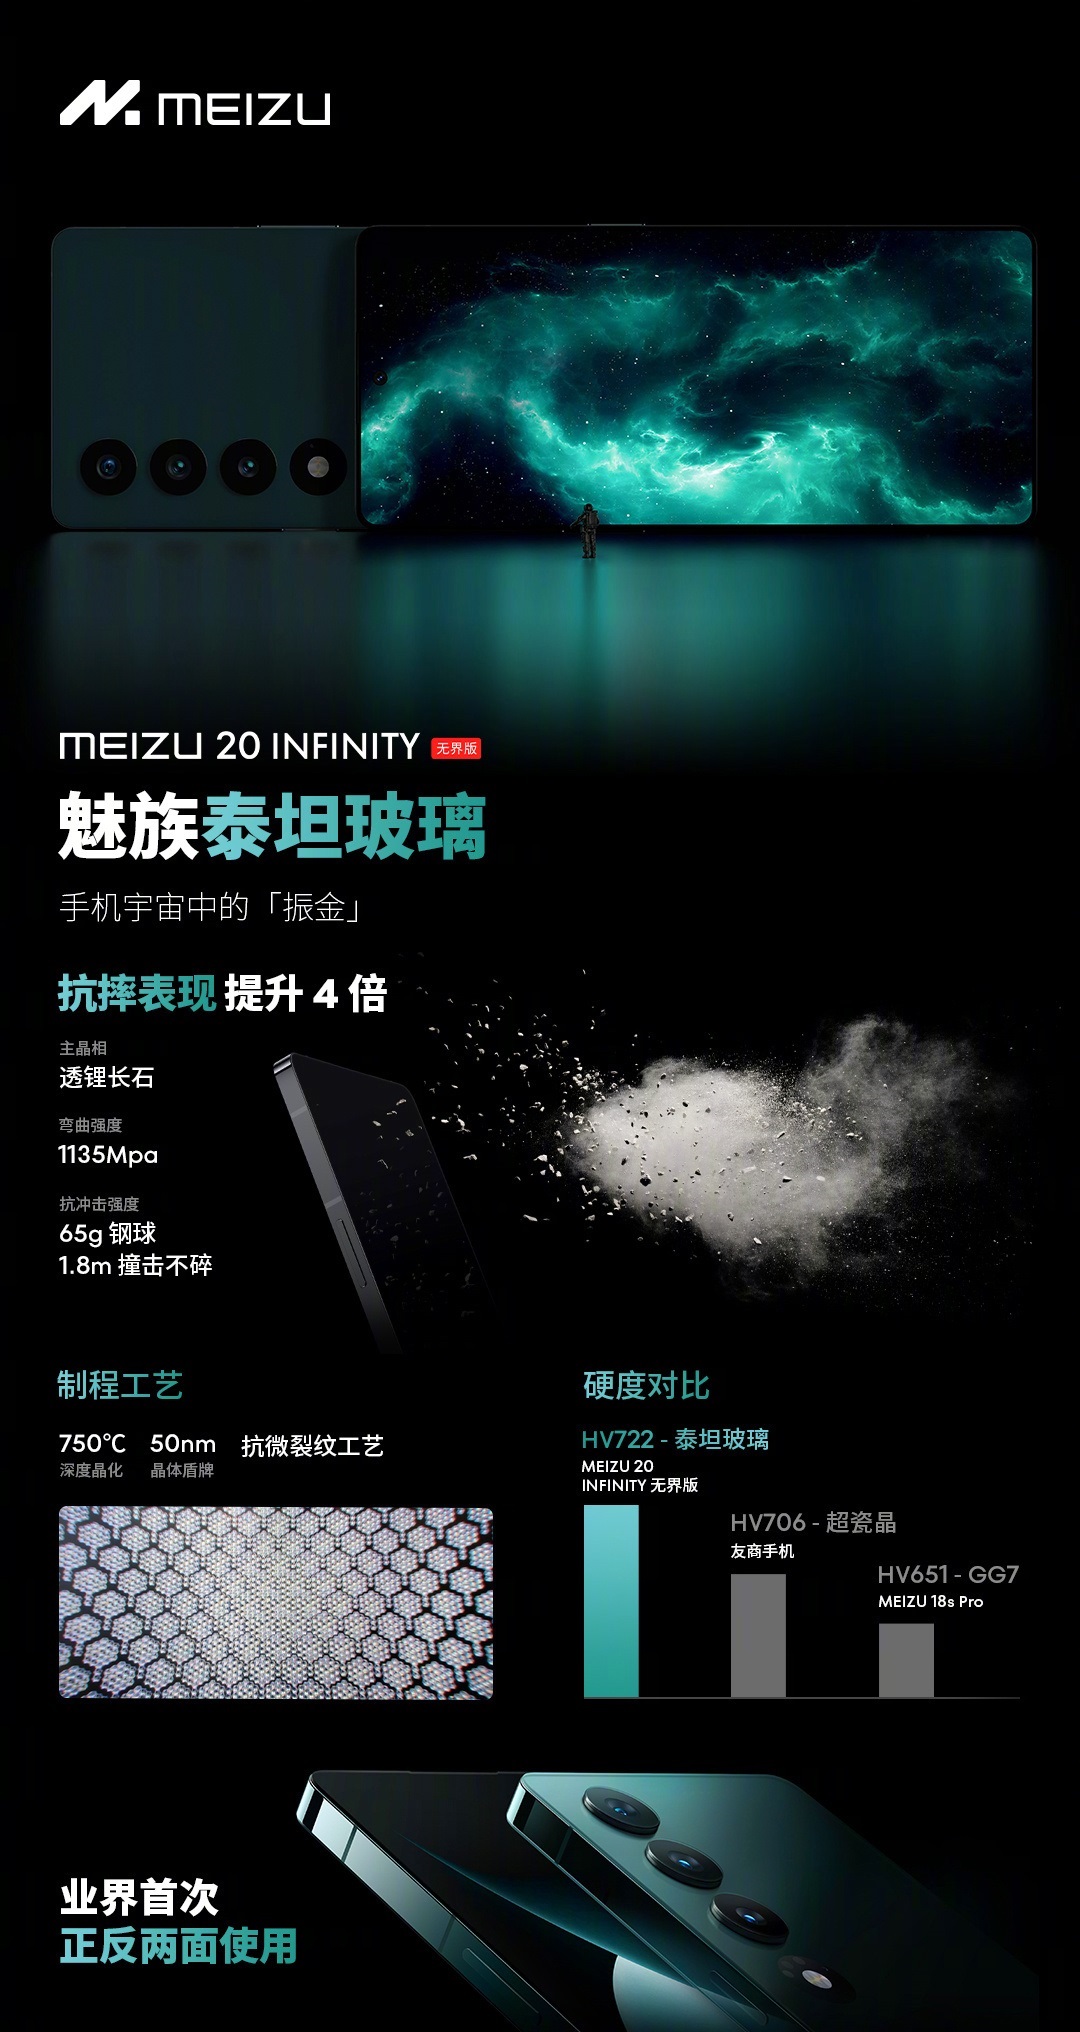 смартфон Meizu 20 INFINITY Unbounded Edition